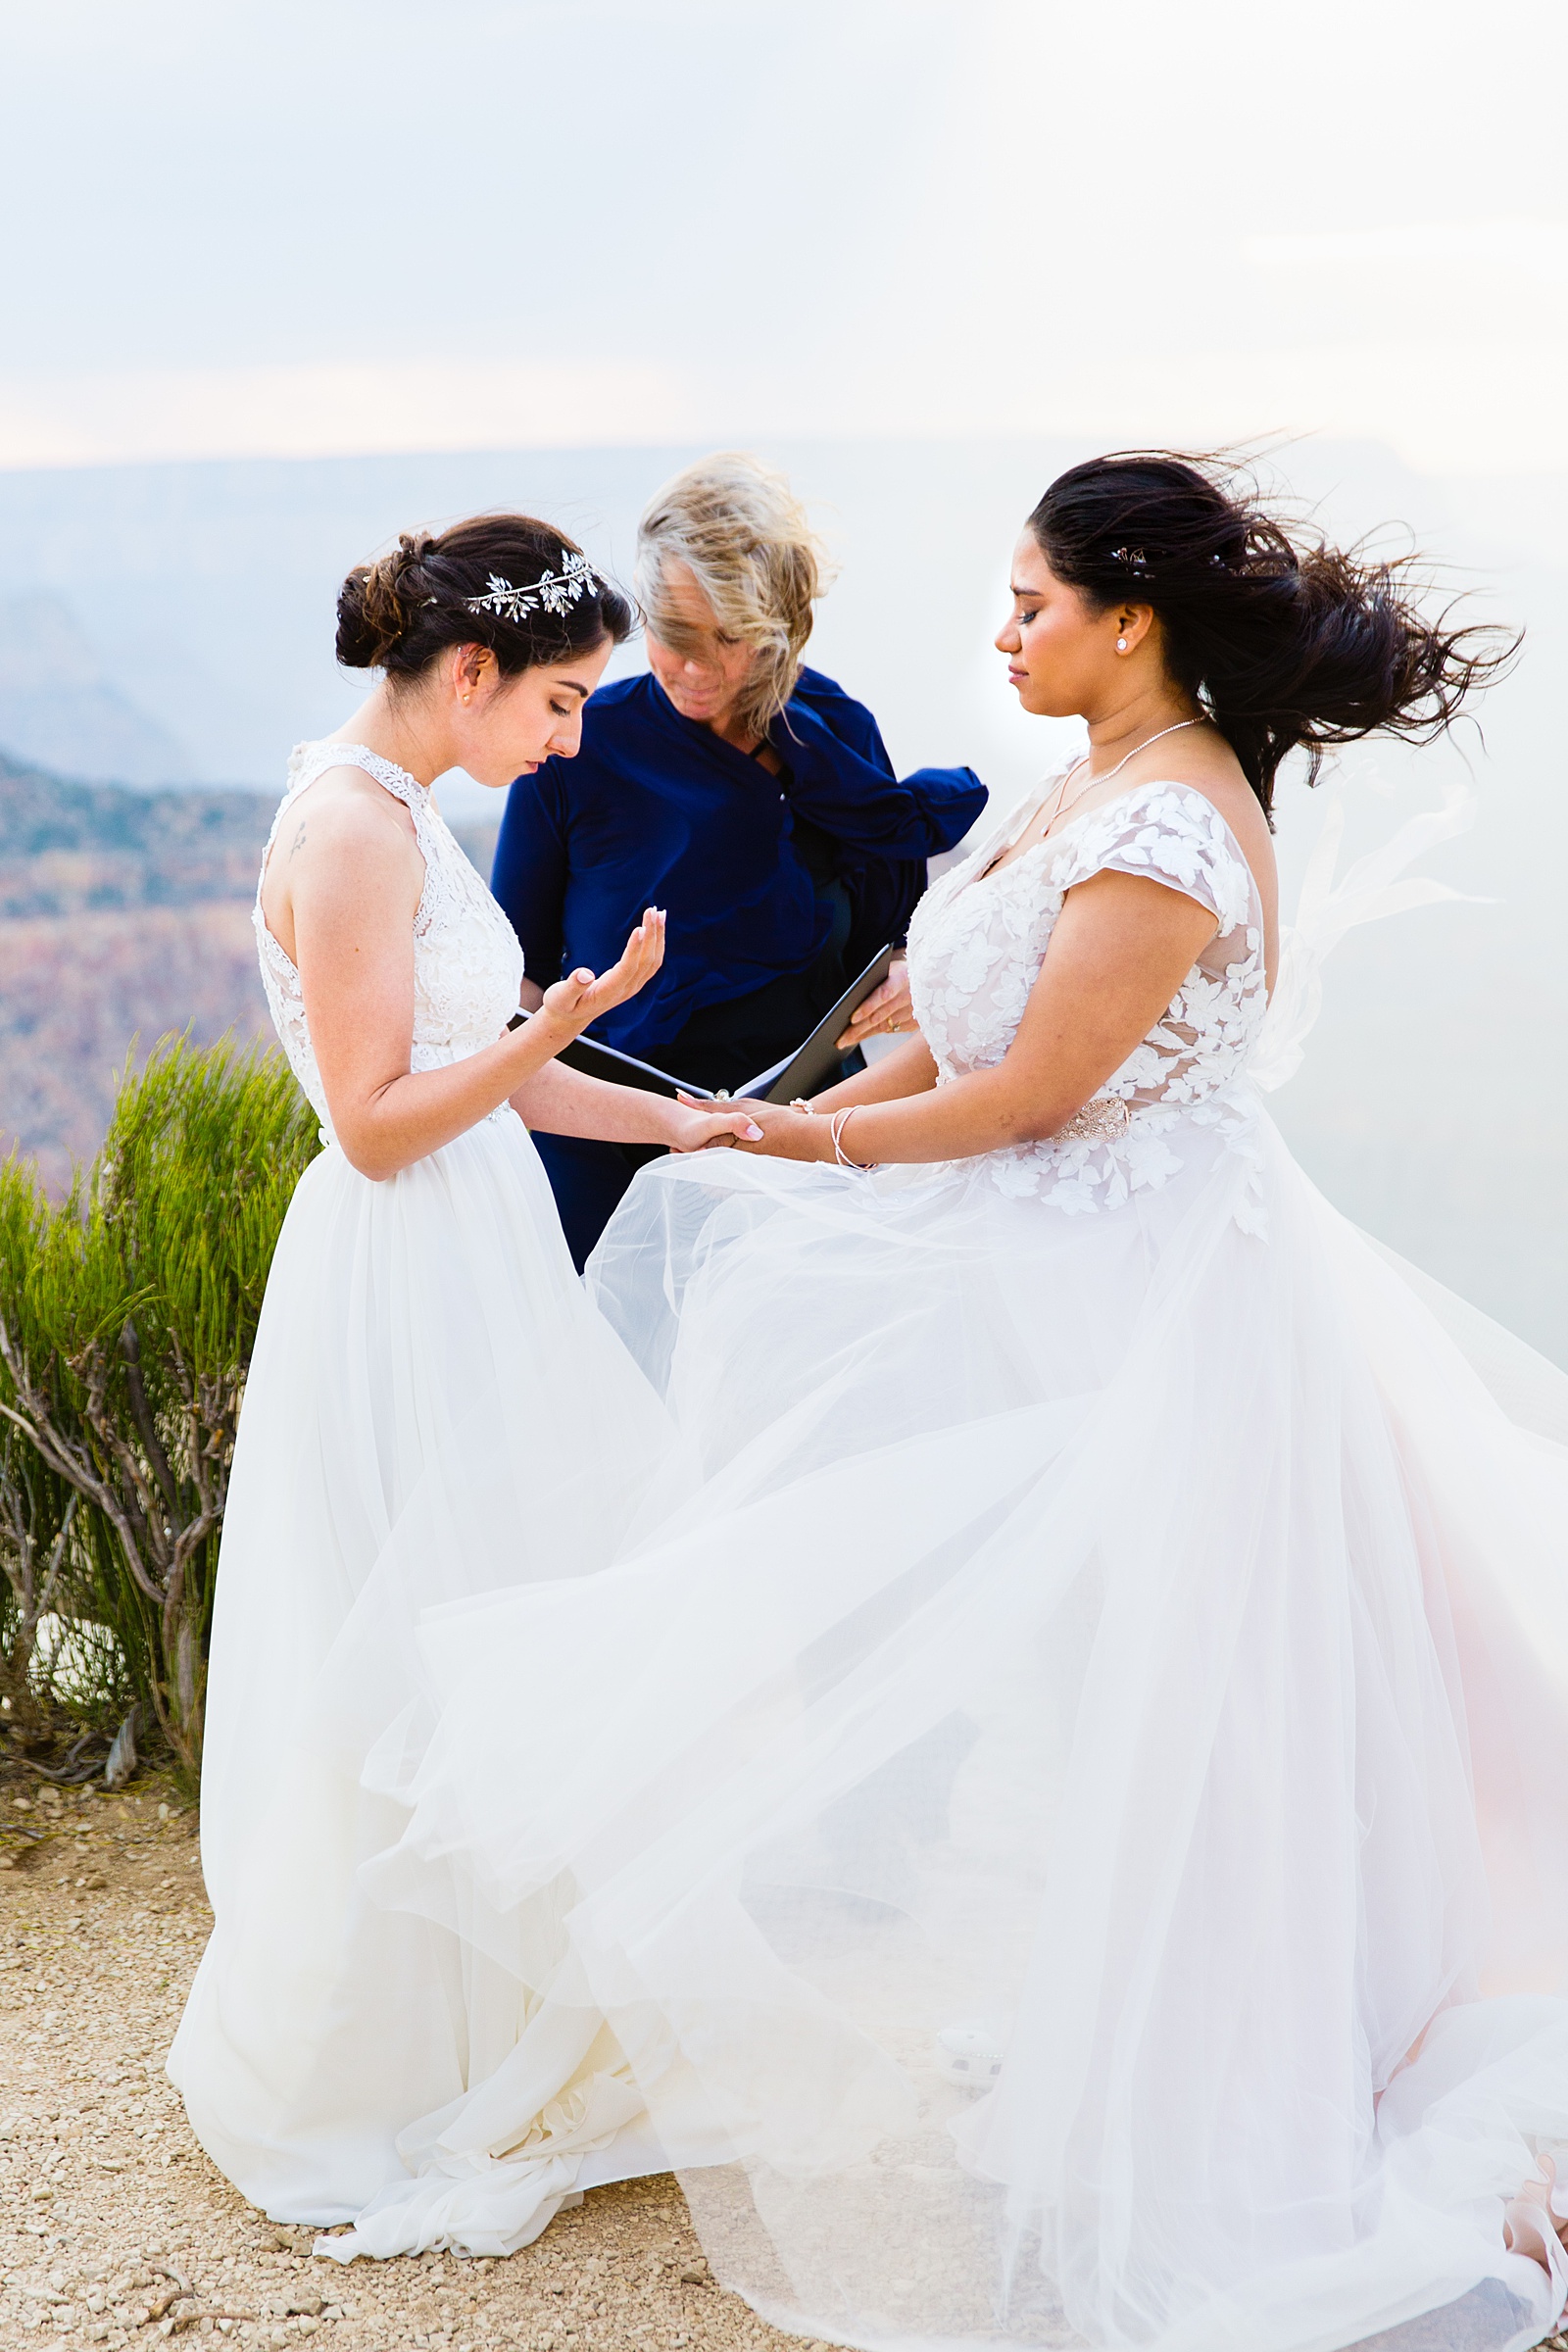 Lesbian couple praying together during their wedding ceremony by Grand Canyon Elopement Photographer PMA Photography.